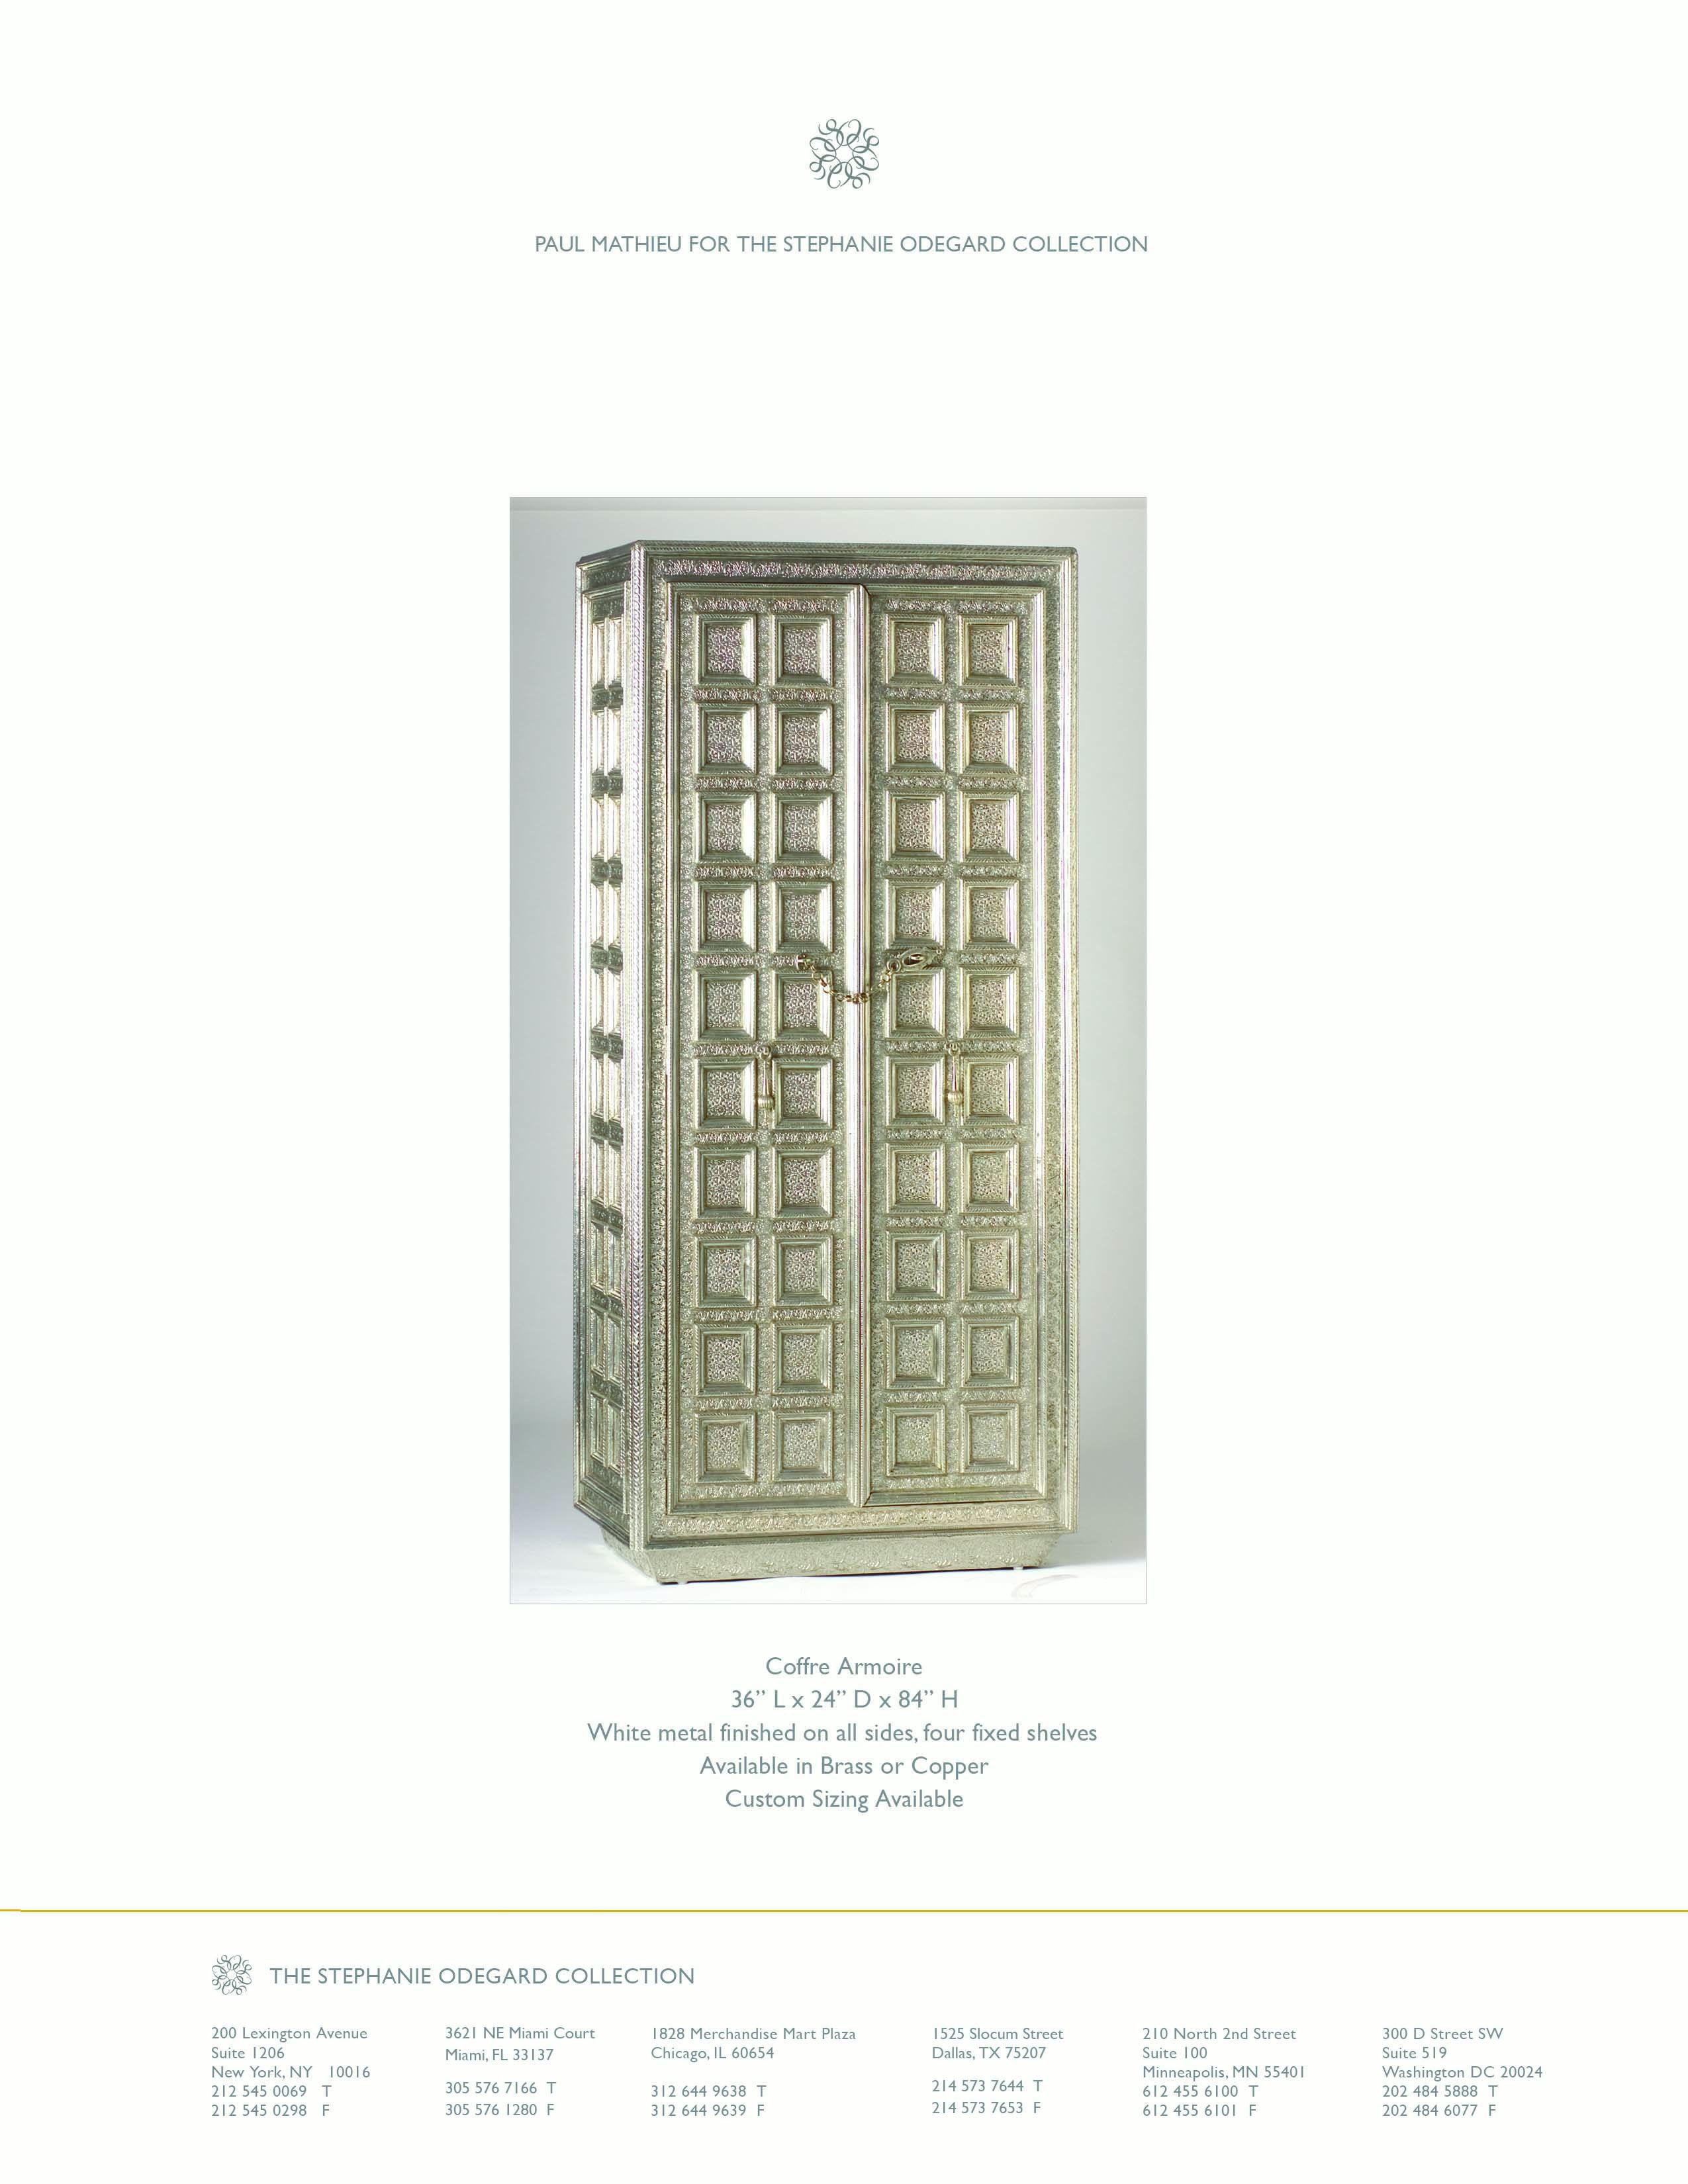 Other Coffre Armoire in White Bronze Handcrafted in India By Paul Mathieu For Sale